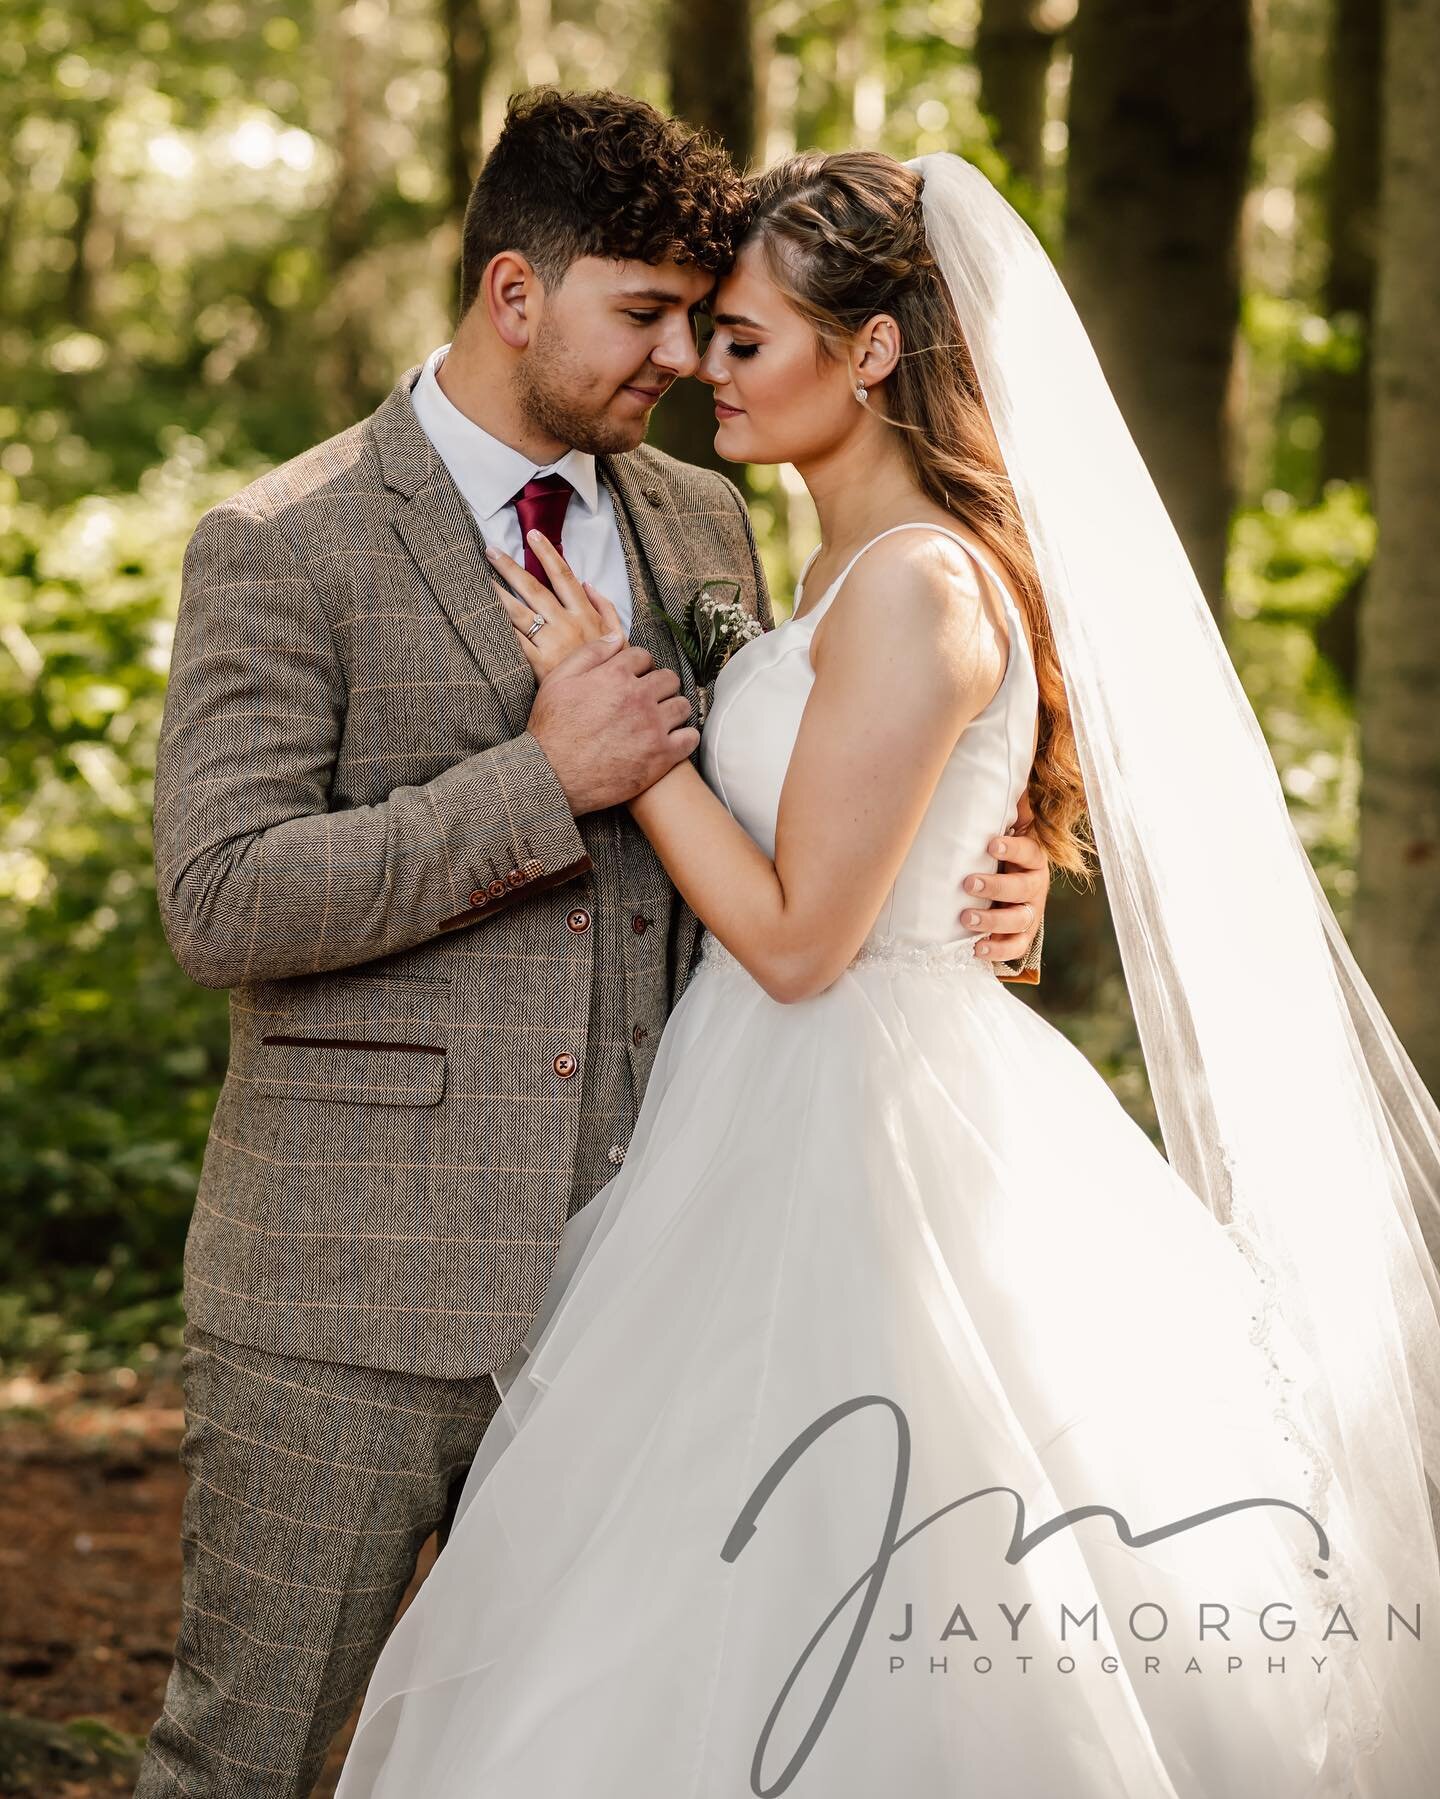 Phoebe said she wanted woodland pictures, and I&rsquo;m so glad she did! Congratulations you two! Thank you for sharing your day at @thehundredhouse with me and @simplygorgeous_uk. Hair and makeup by me_time_aesthetics and @eb_hair_design!